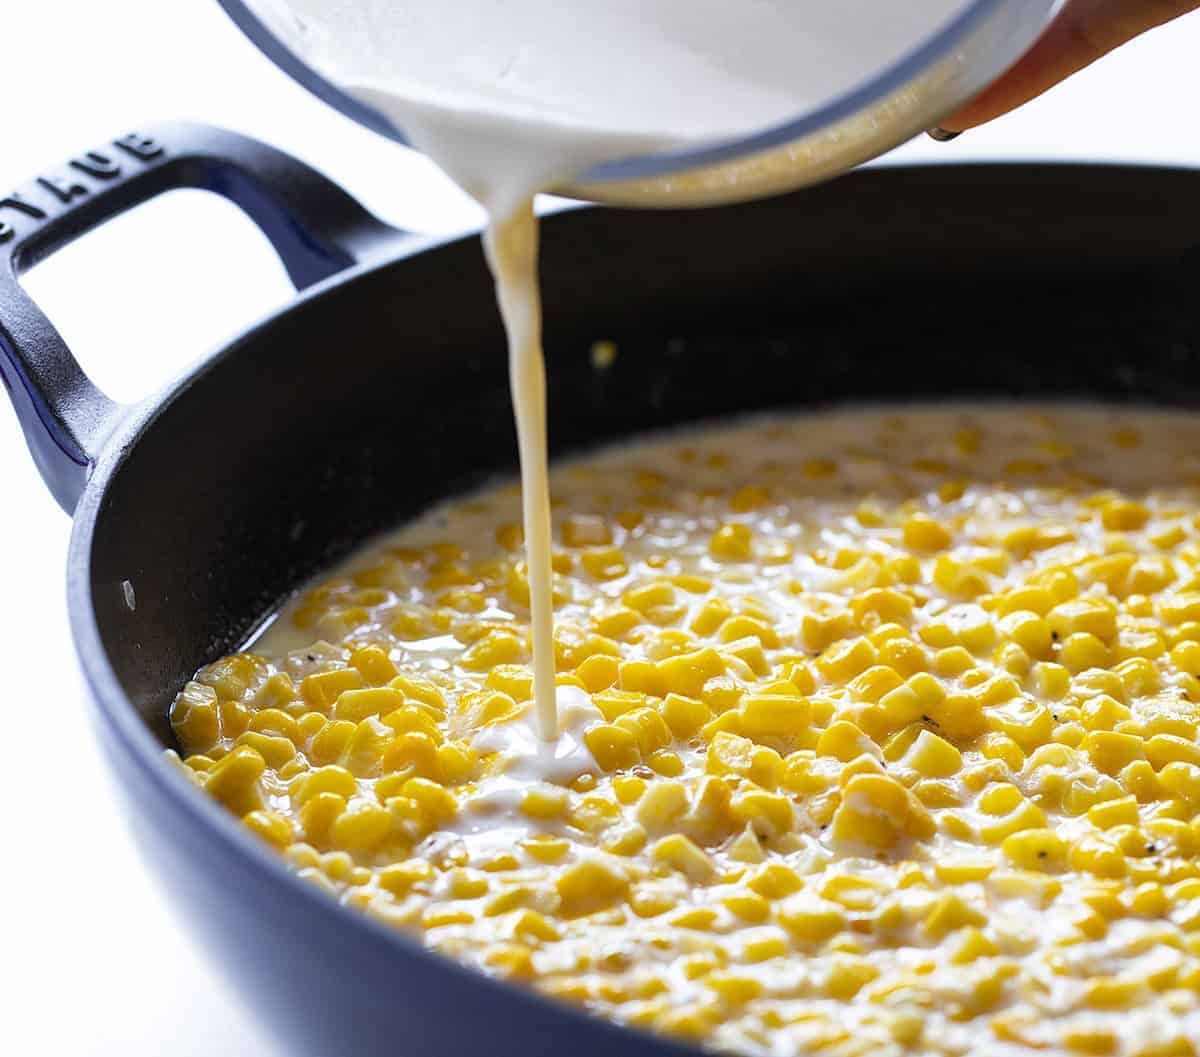 Cream being poured into a pan of corn